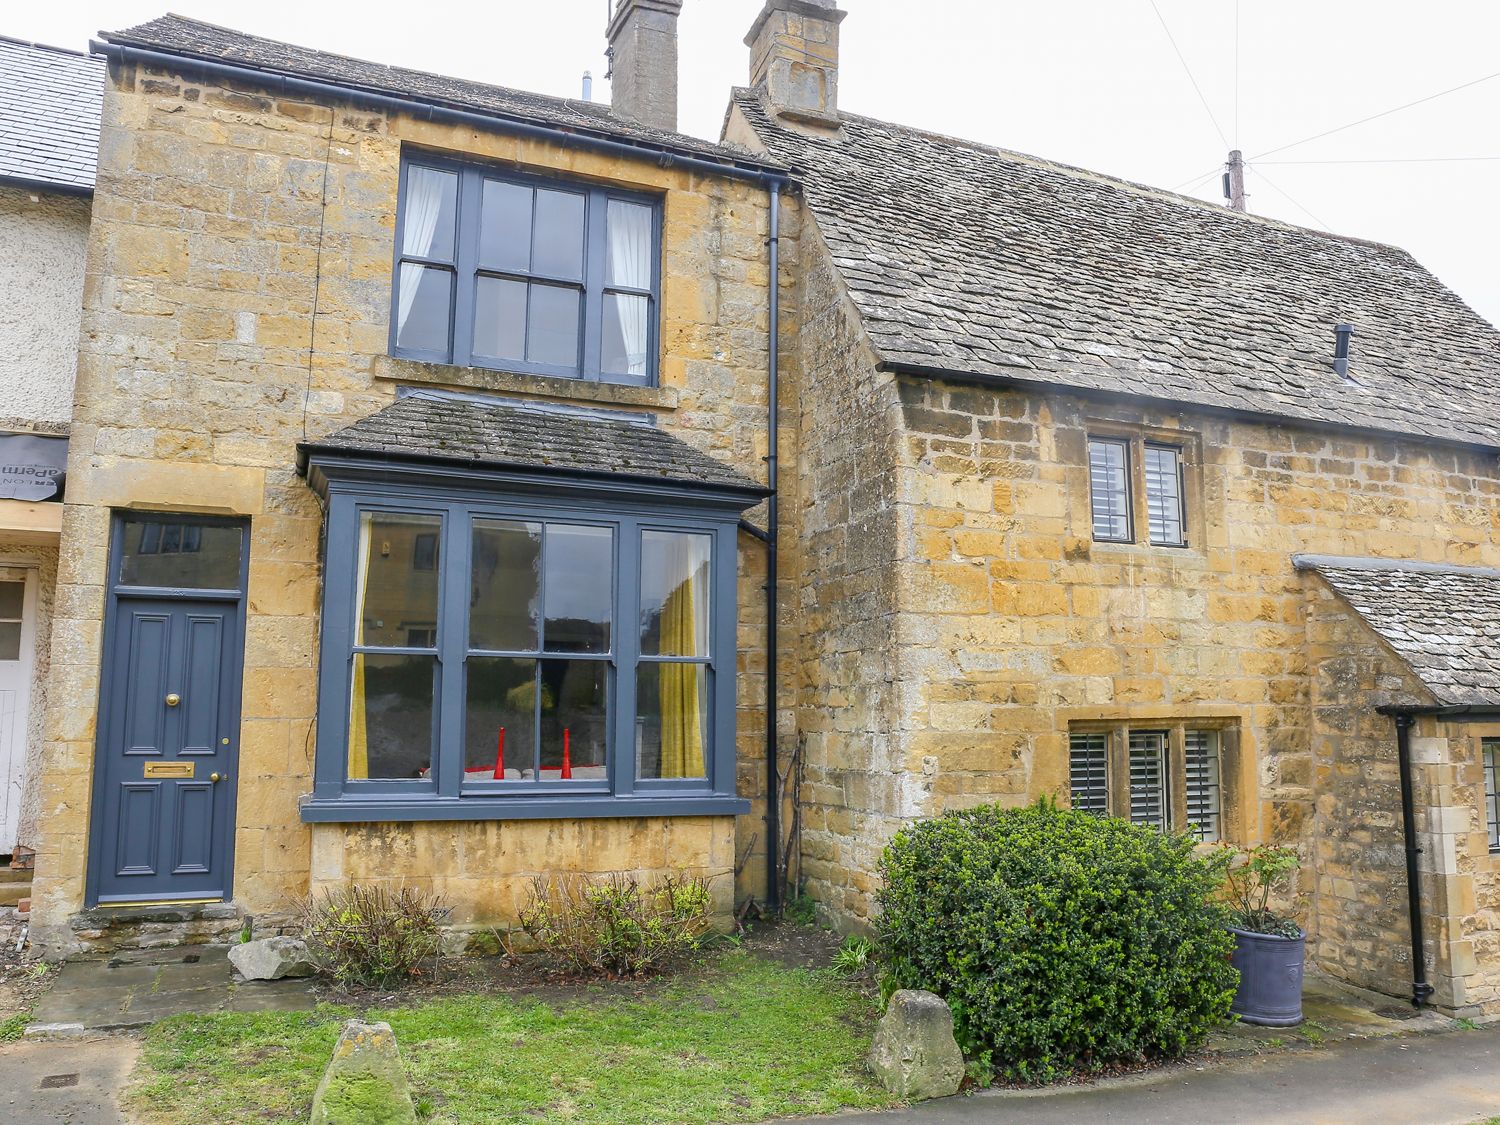 The Cottage at Broadway - Cotswolds - 1000430 - photo 1